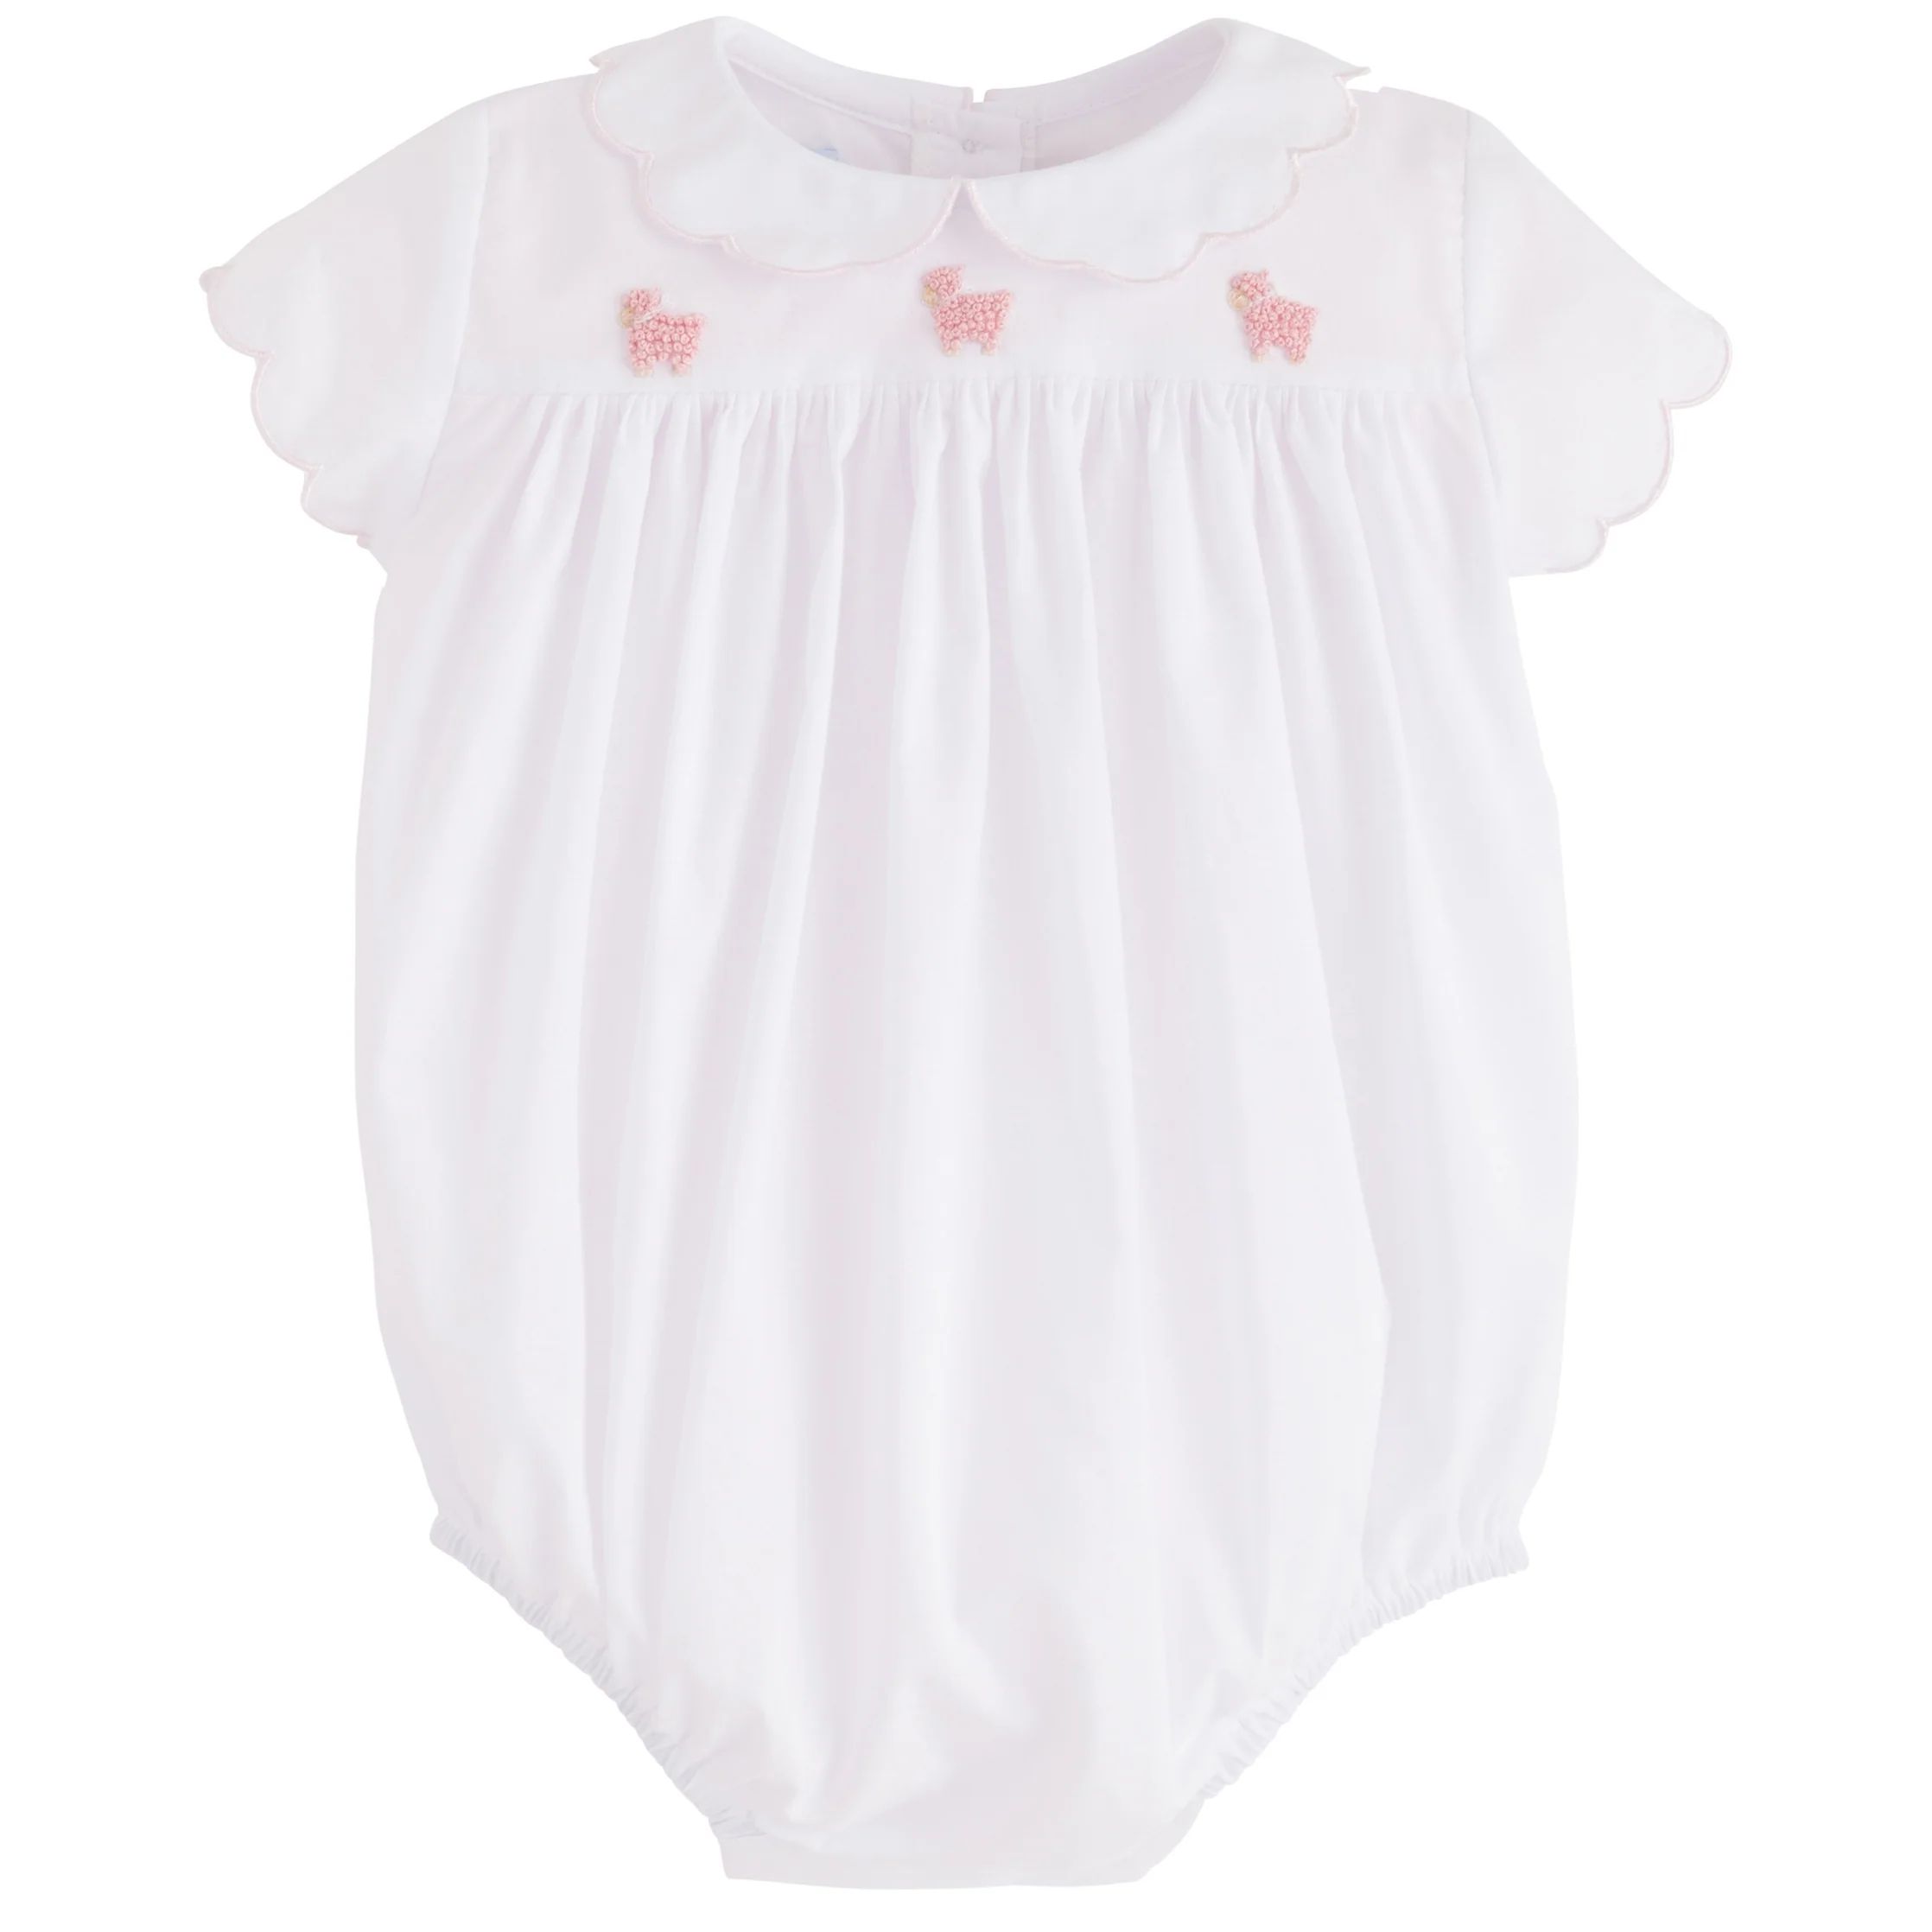 Embroidered Baby Clothes - Baby Girl's Bubble | Little English